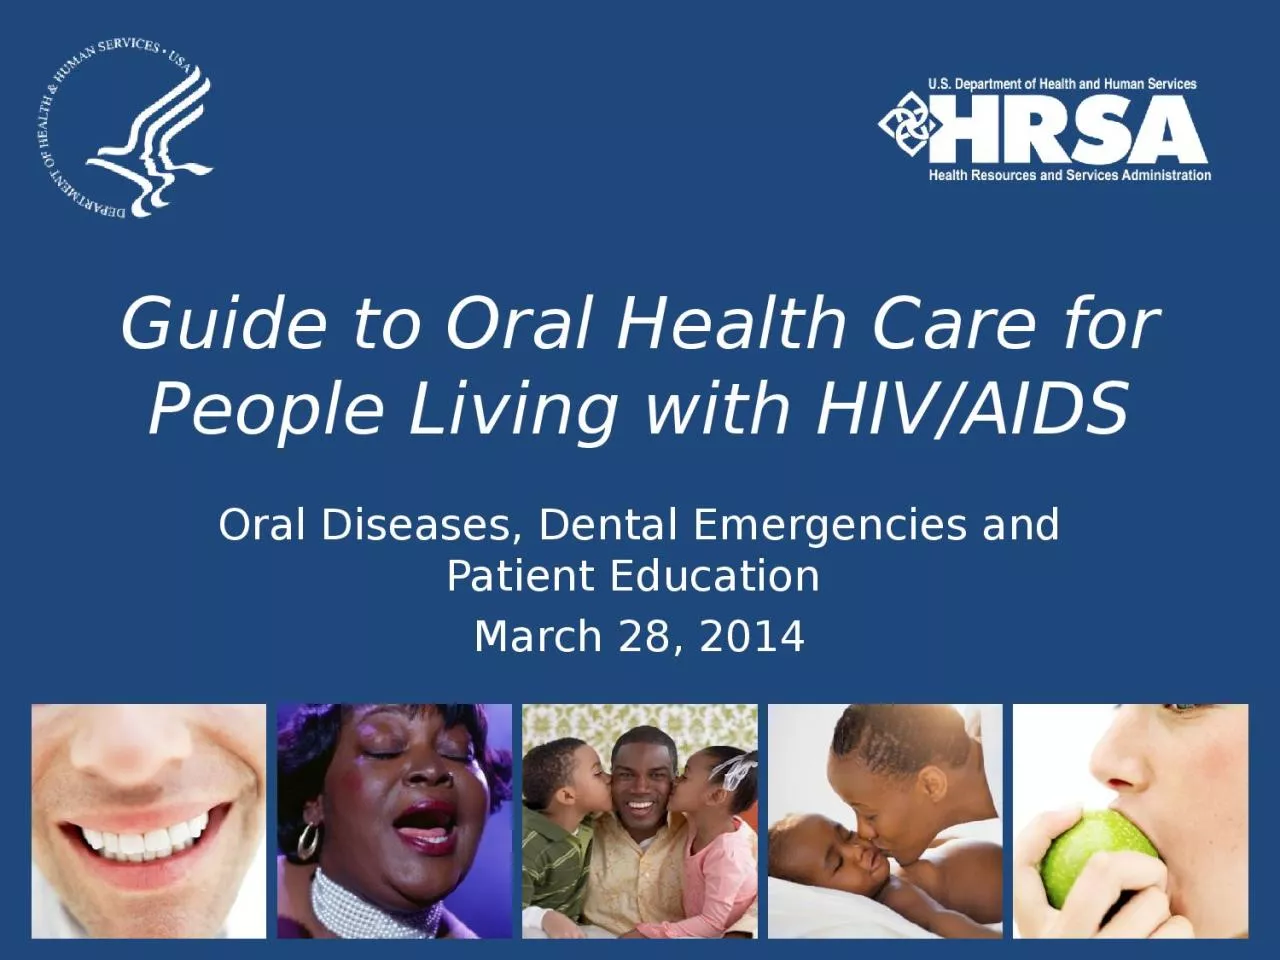 Guide to Oral Health Care for People Living with HIV/AIDS